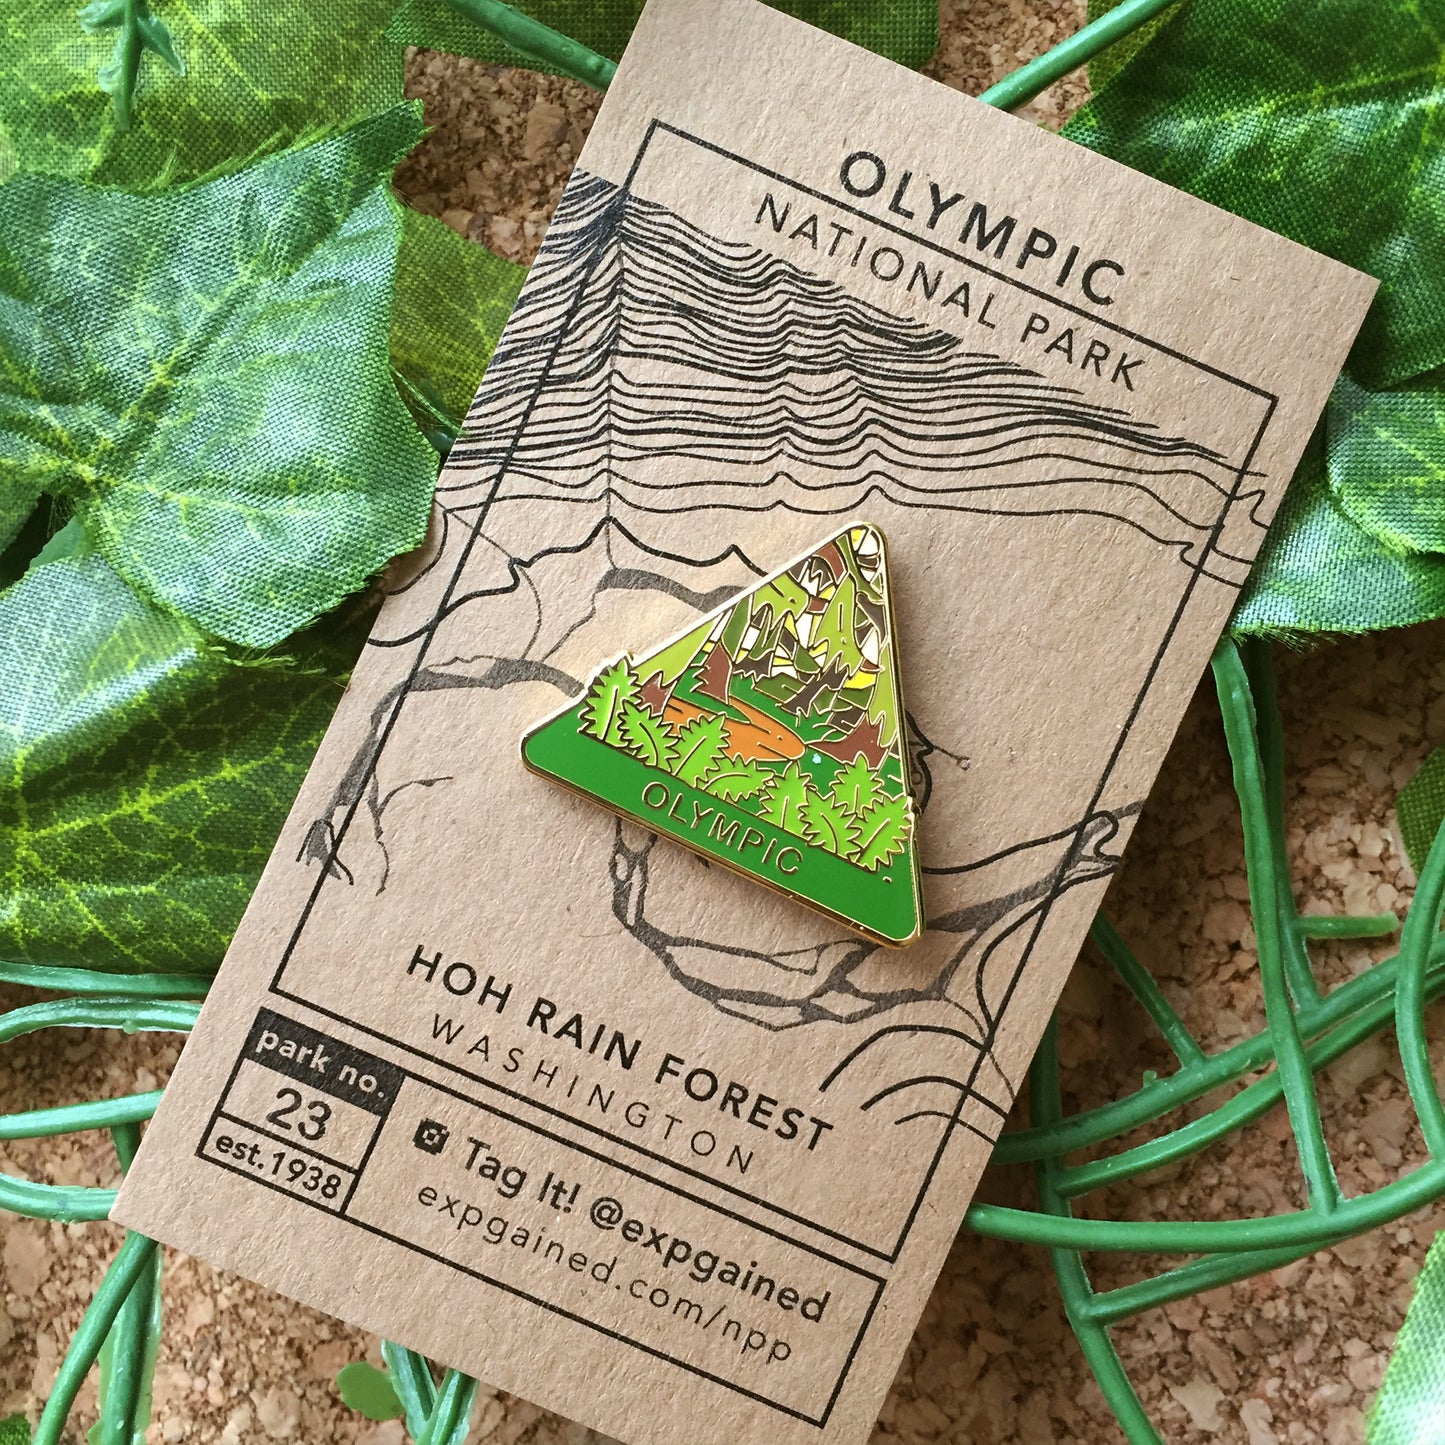 Triangle Olympic national park enamel pin featuring a view from the beehive hike on a brown business card size backing card with a topo map of Hoh Rain Forest.